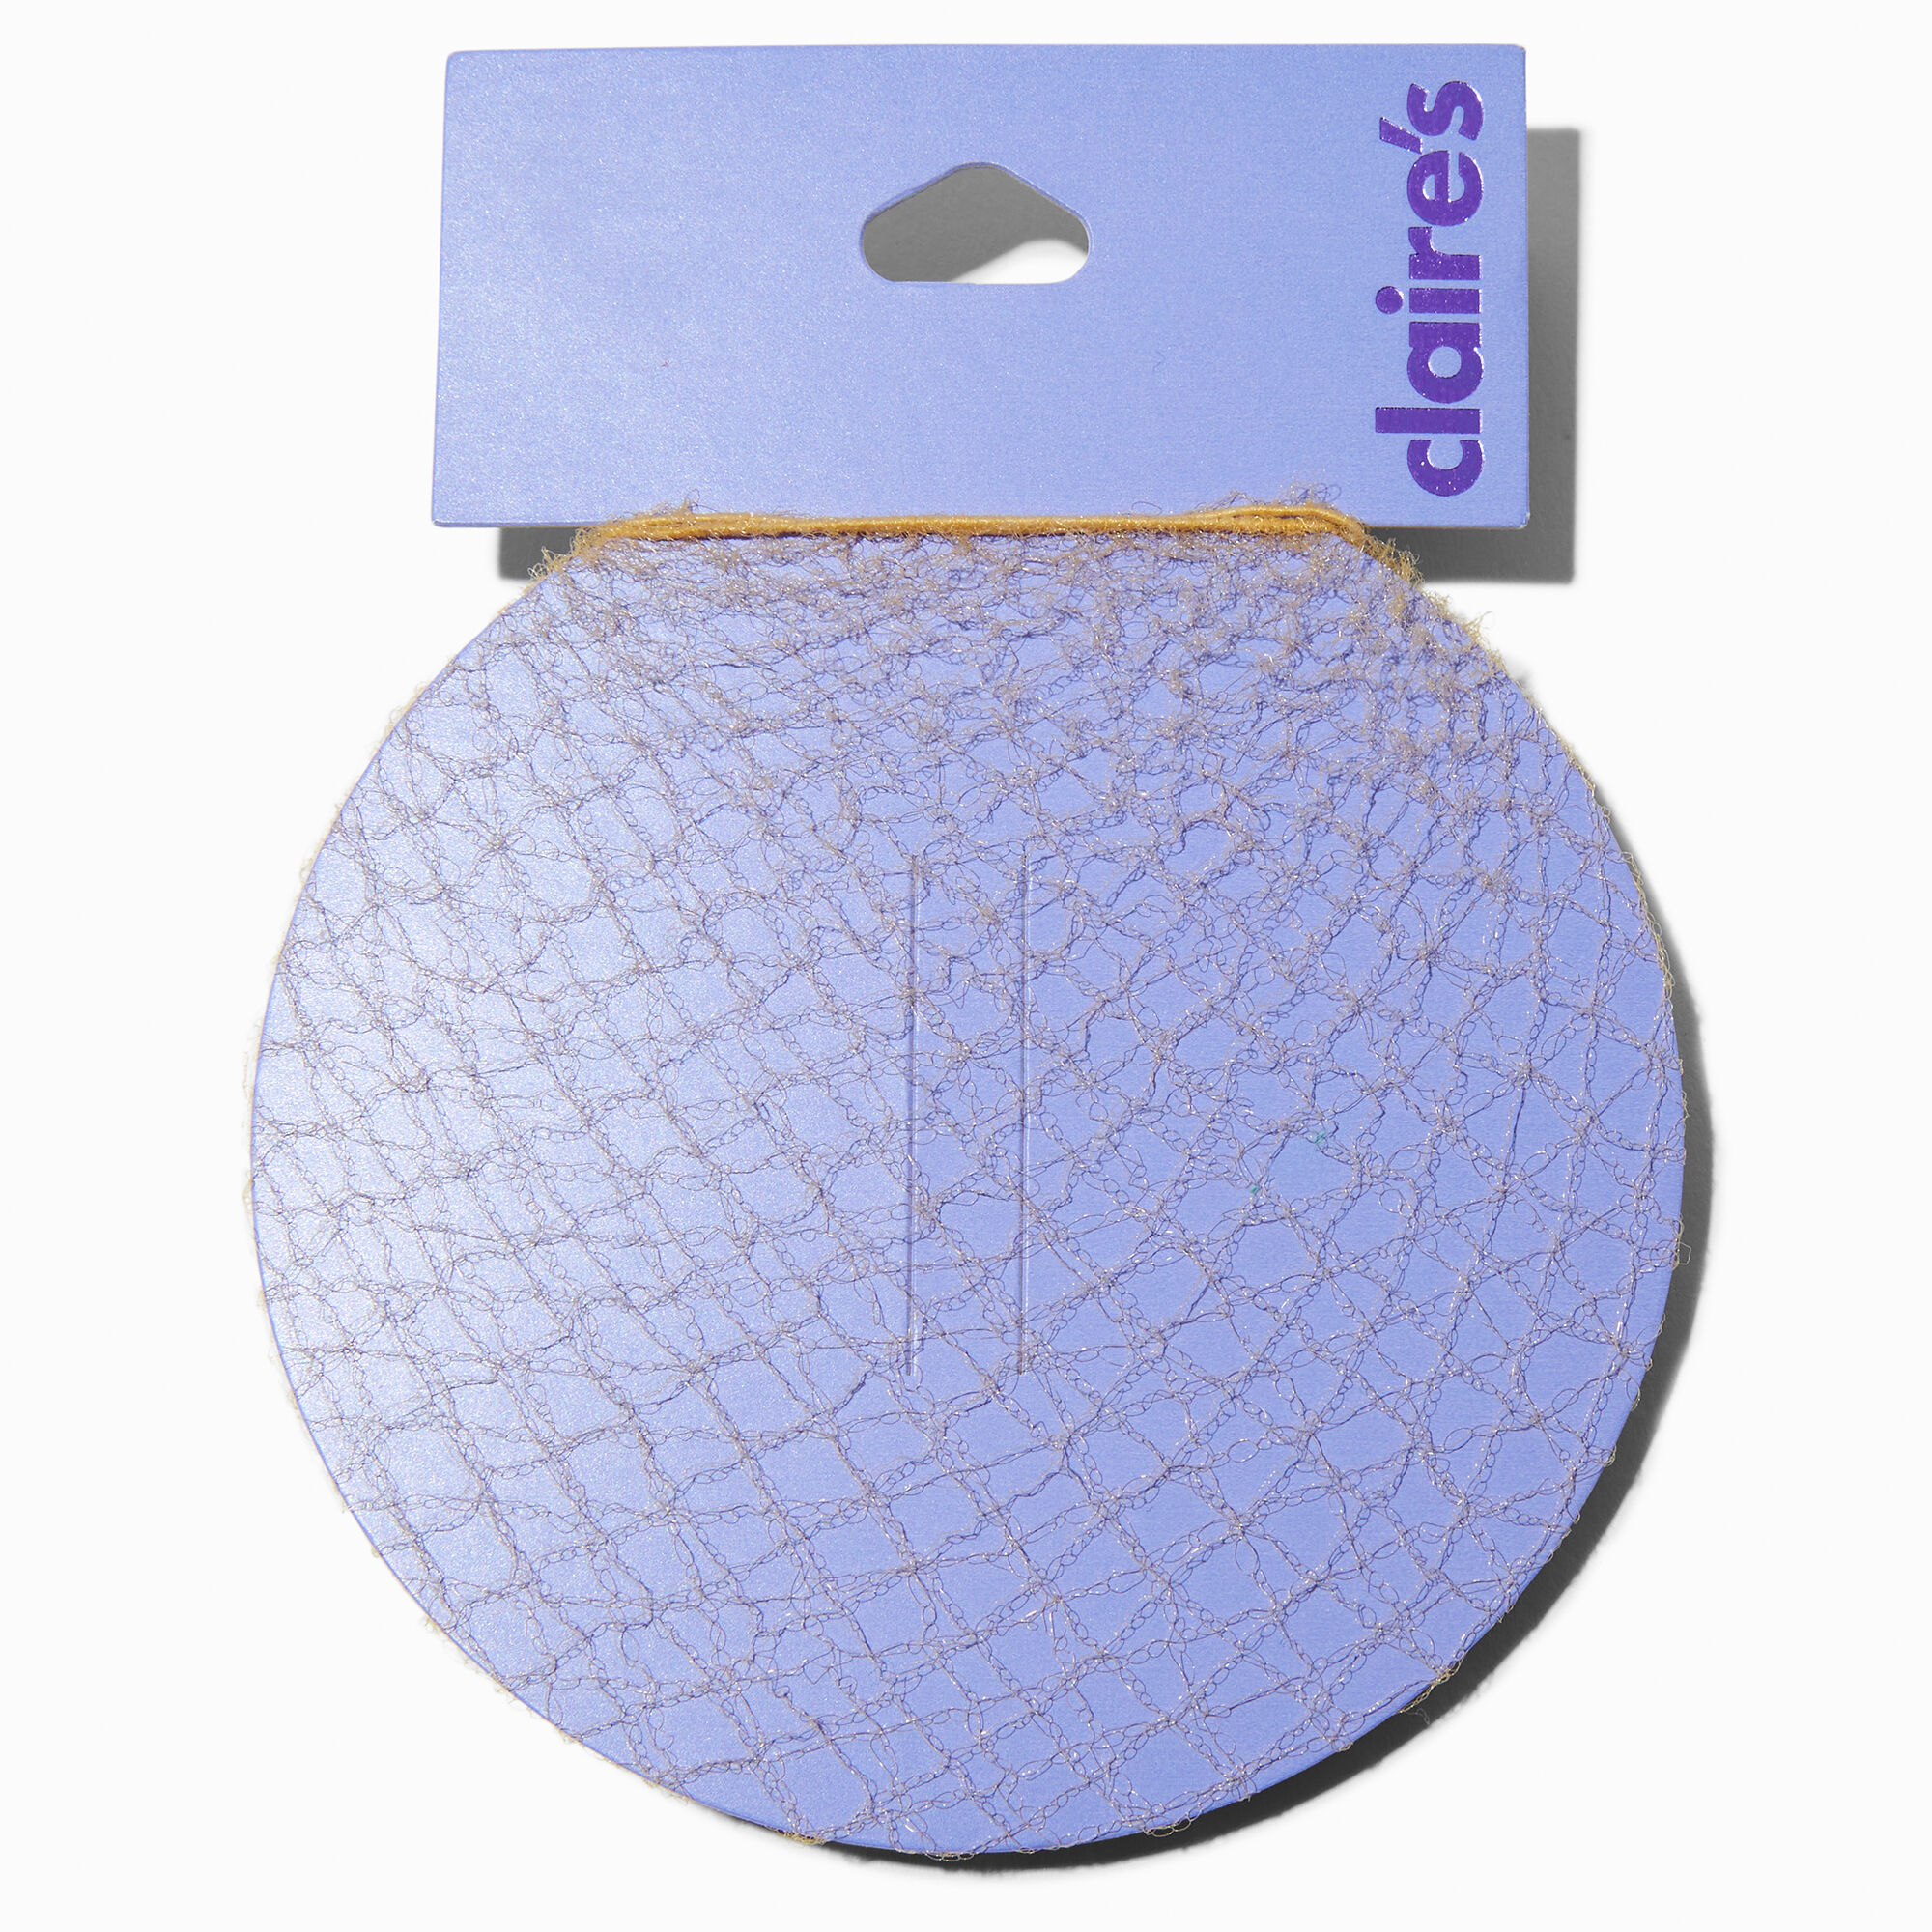 View Claires Hair Net Blond information